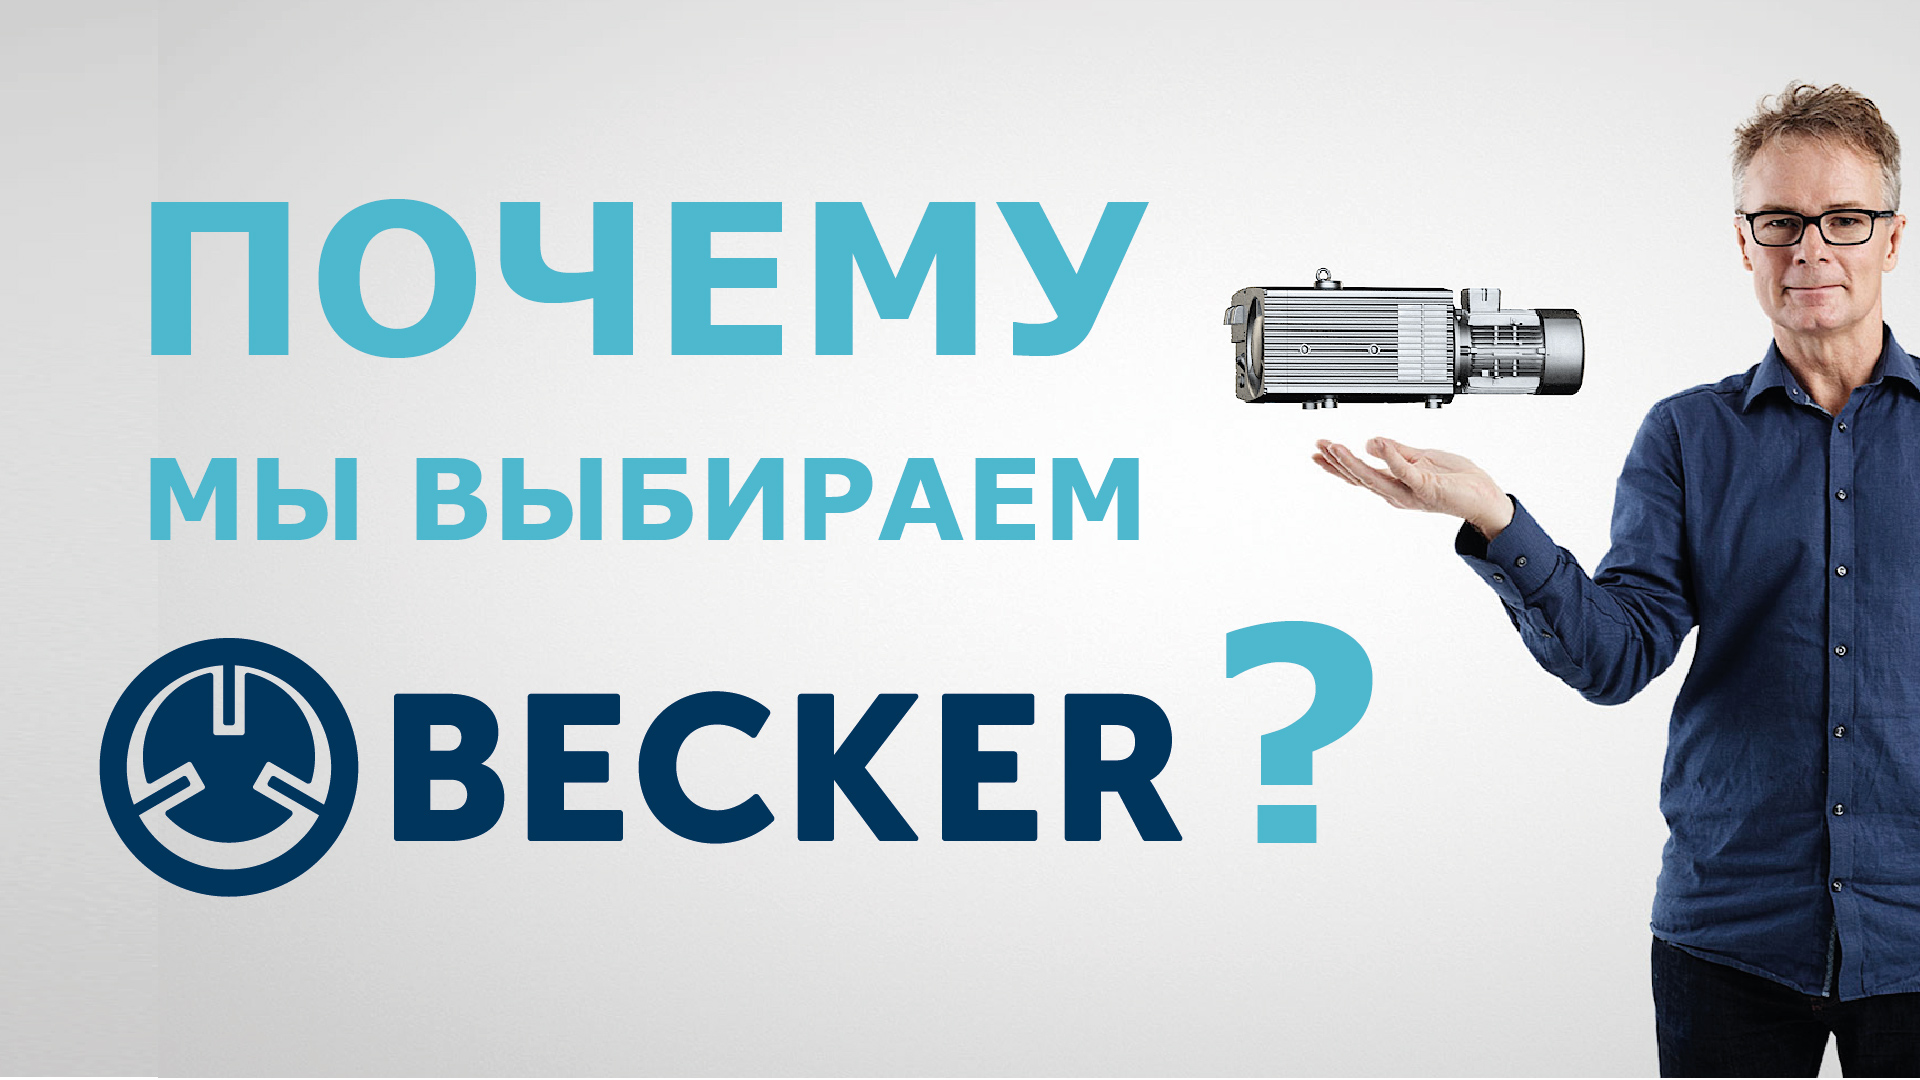 Presentation of the BECKER factory